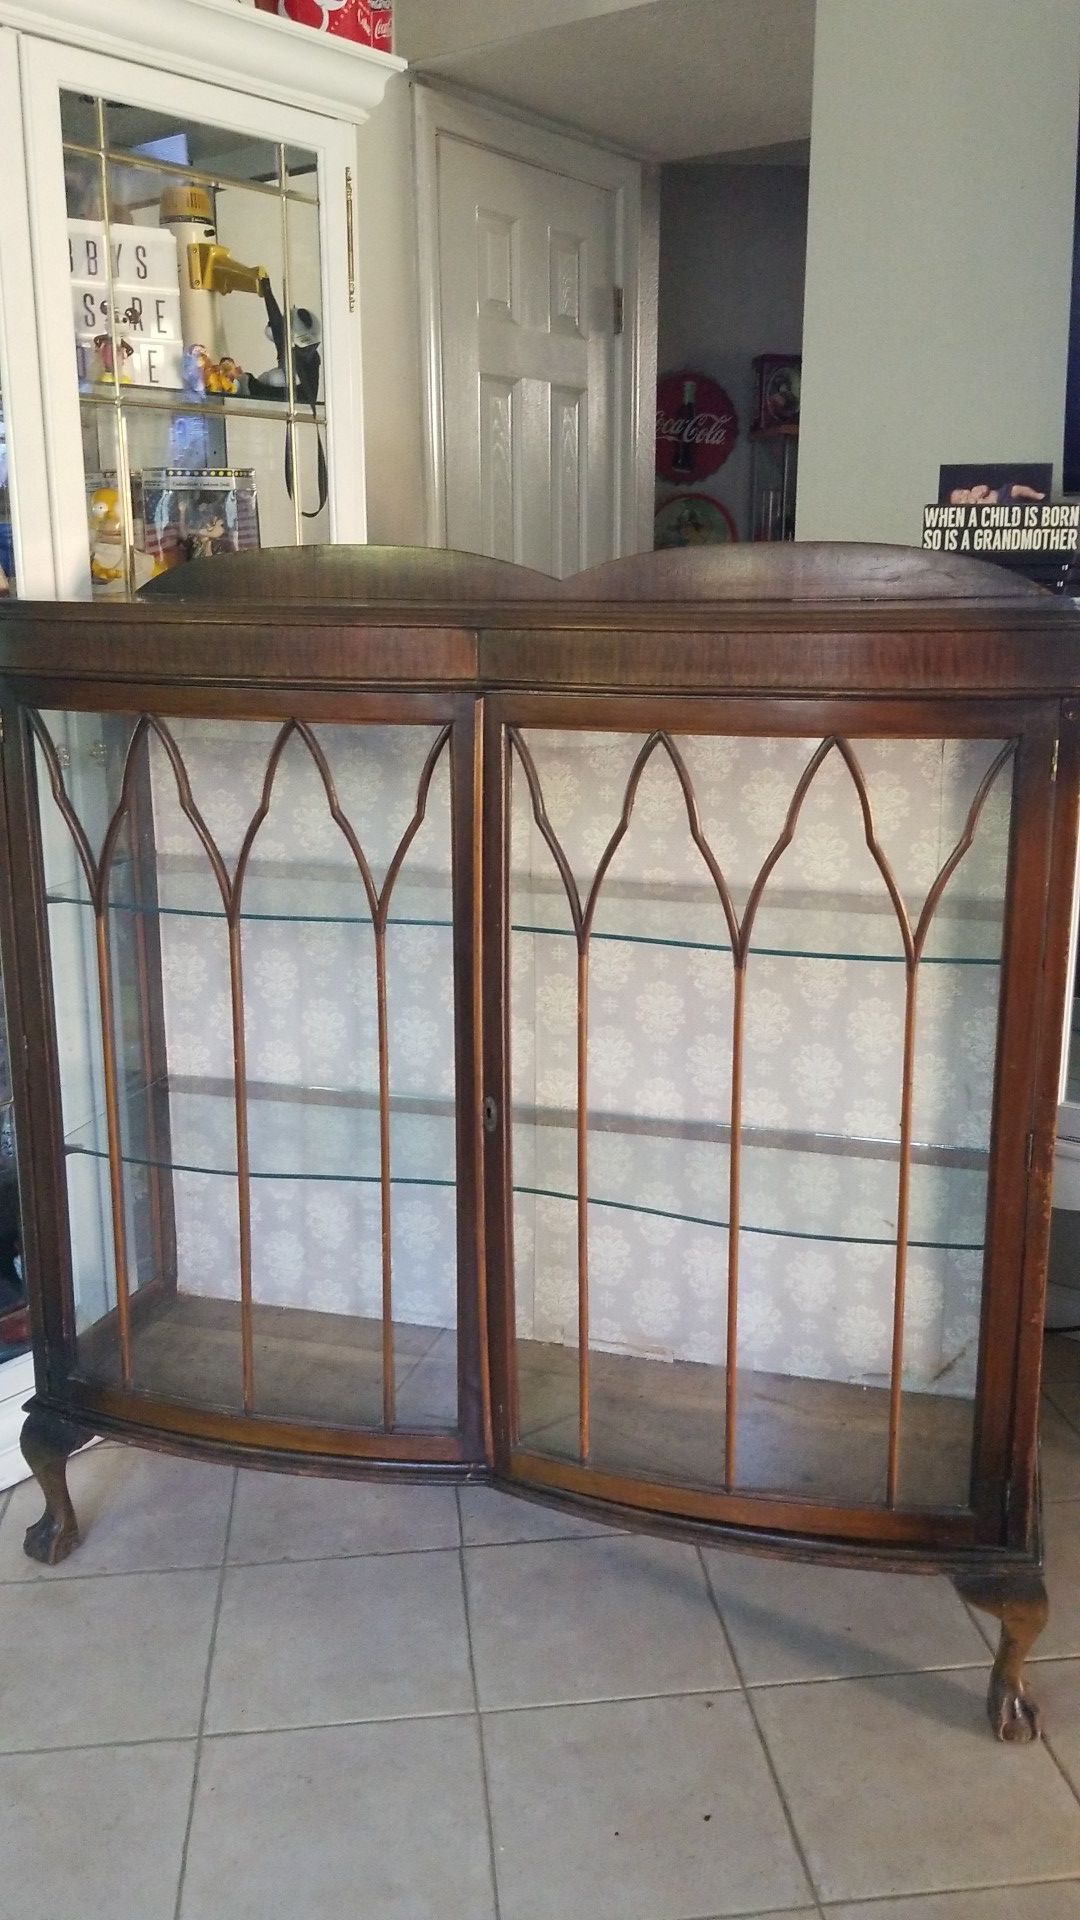 Antique 19th Century Glass Claw Foot Display/China Cabinet Solid Wood Very Good Condition 4ft H 4ft W 14" D